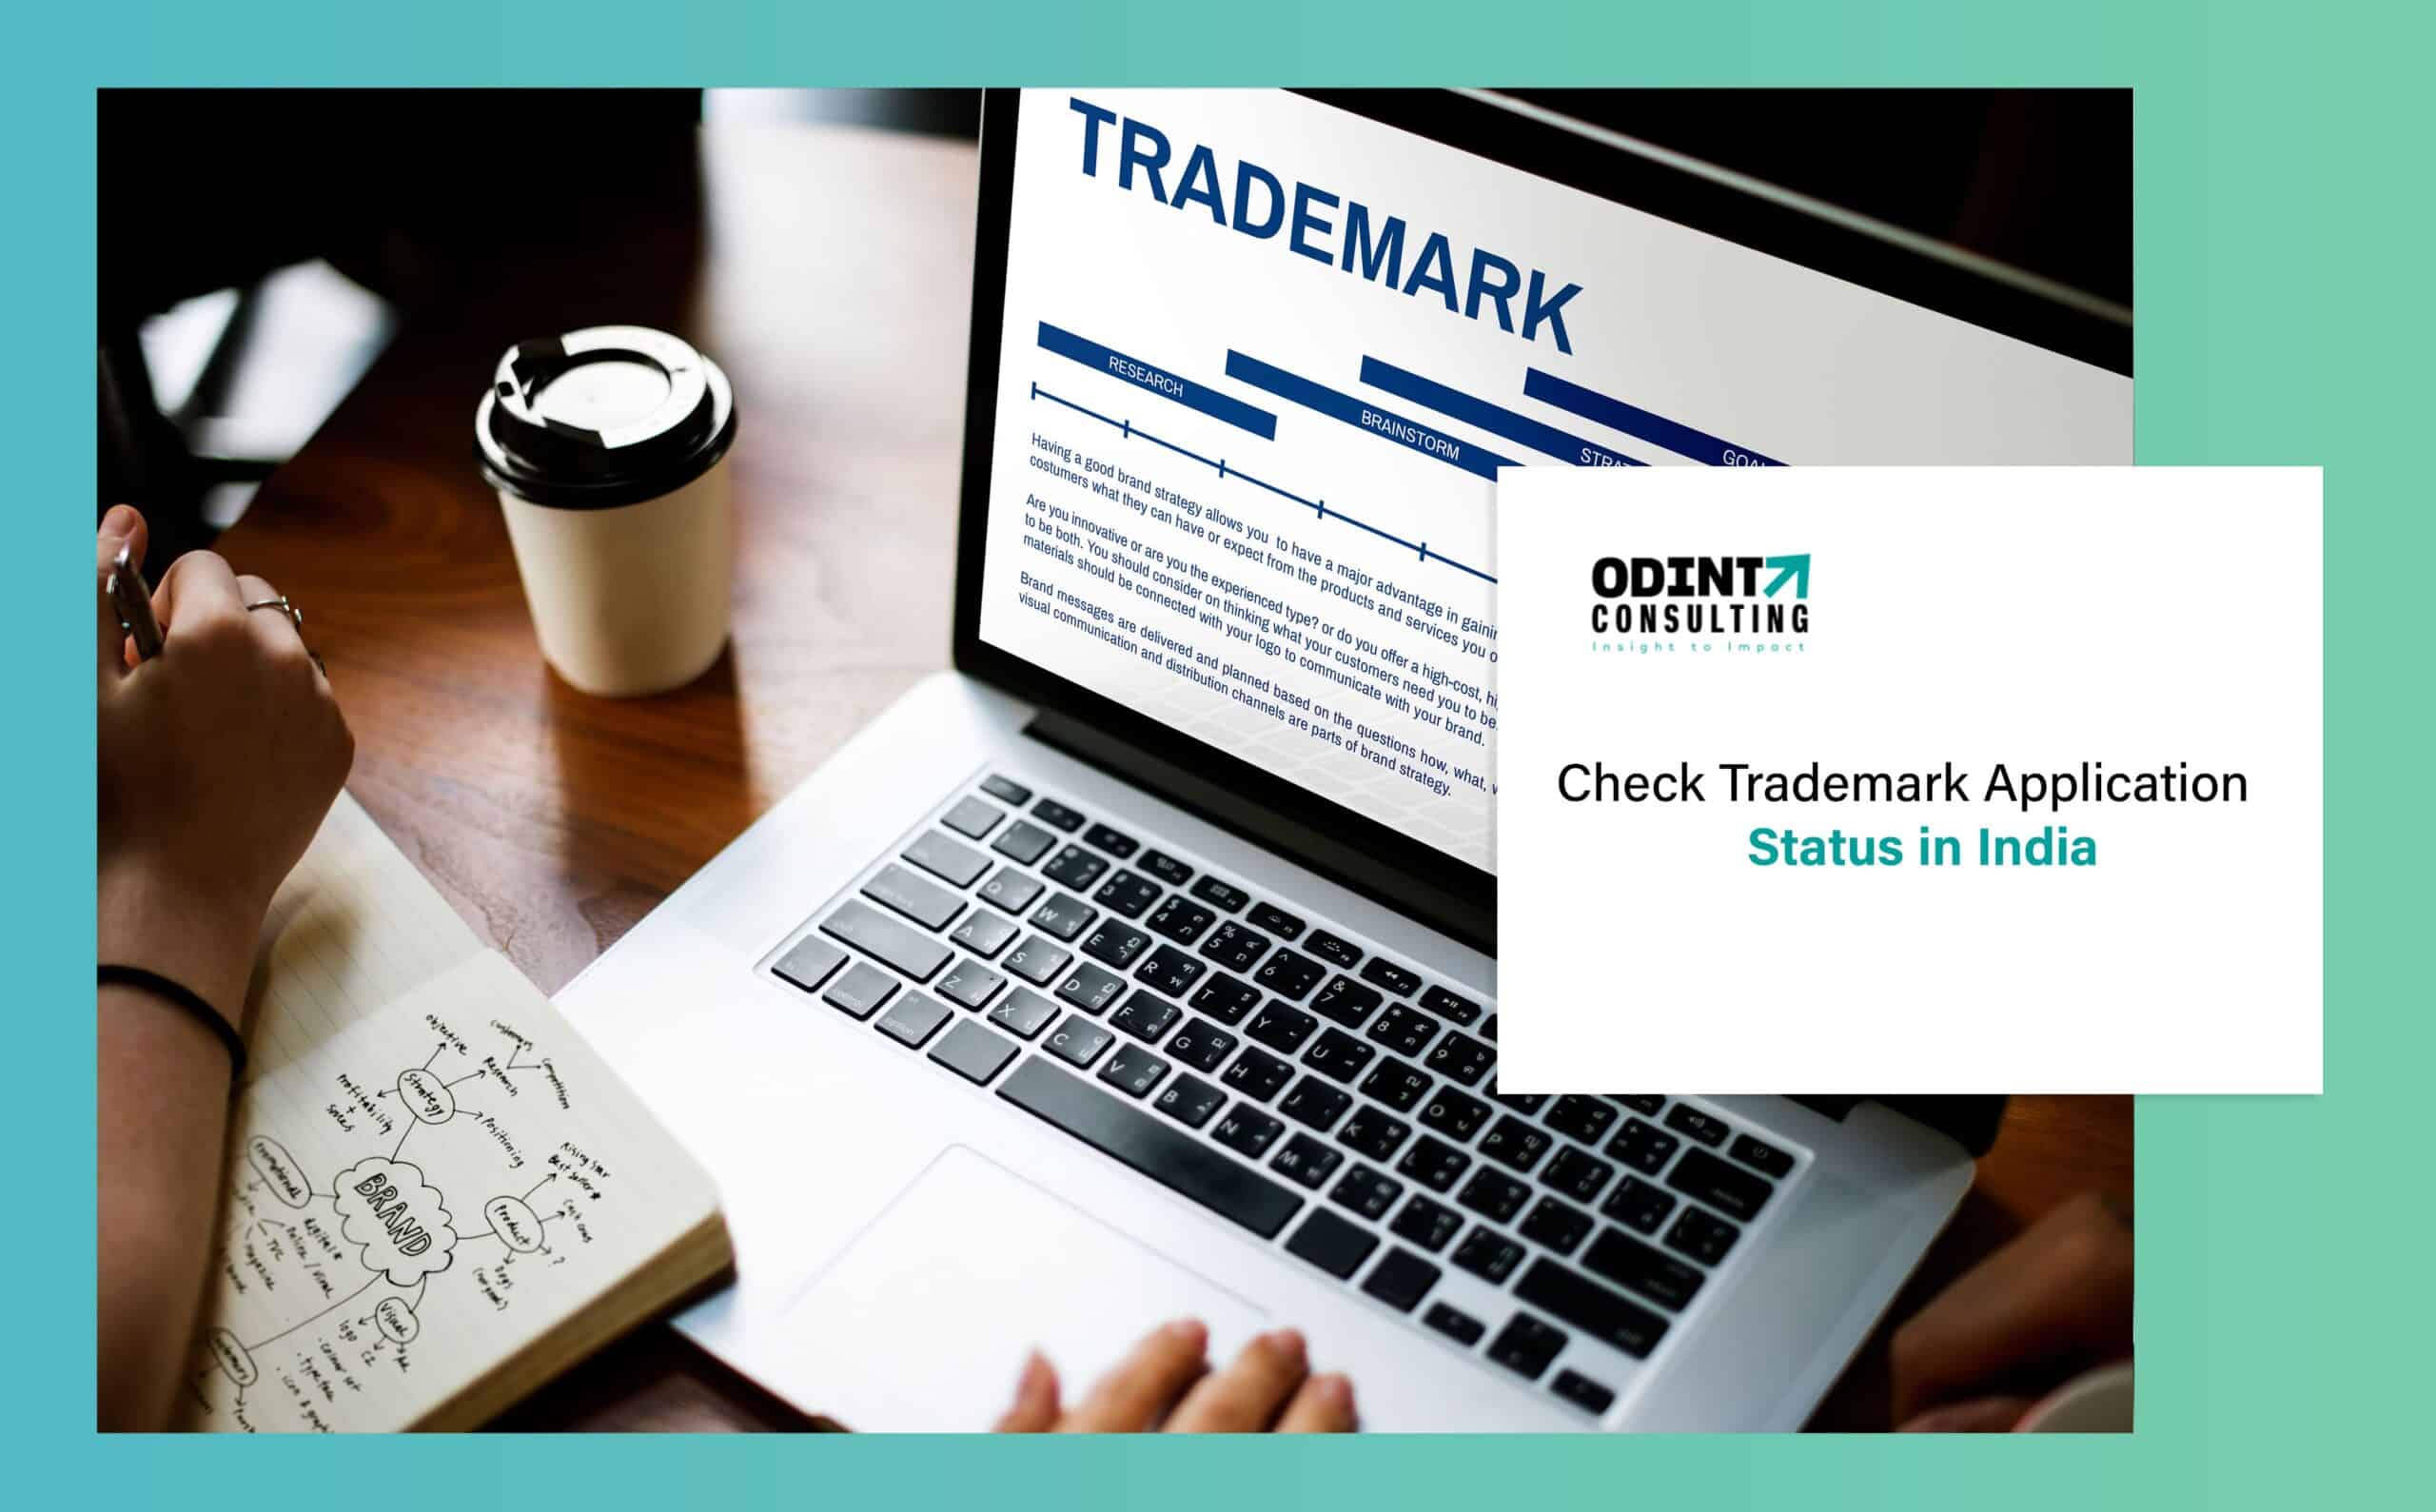 Check Trademark Application Status in India: Types of Status with Meaning